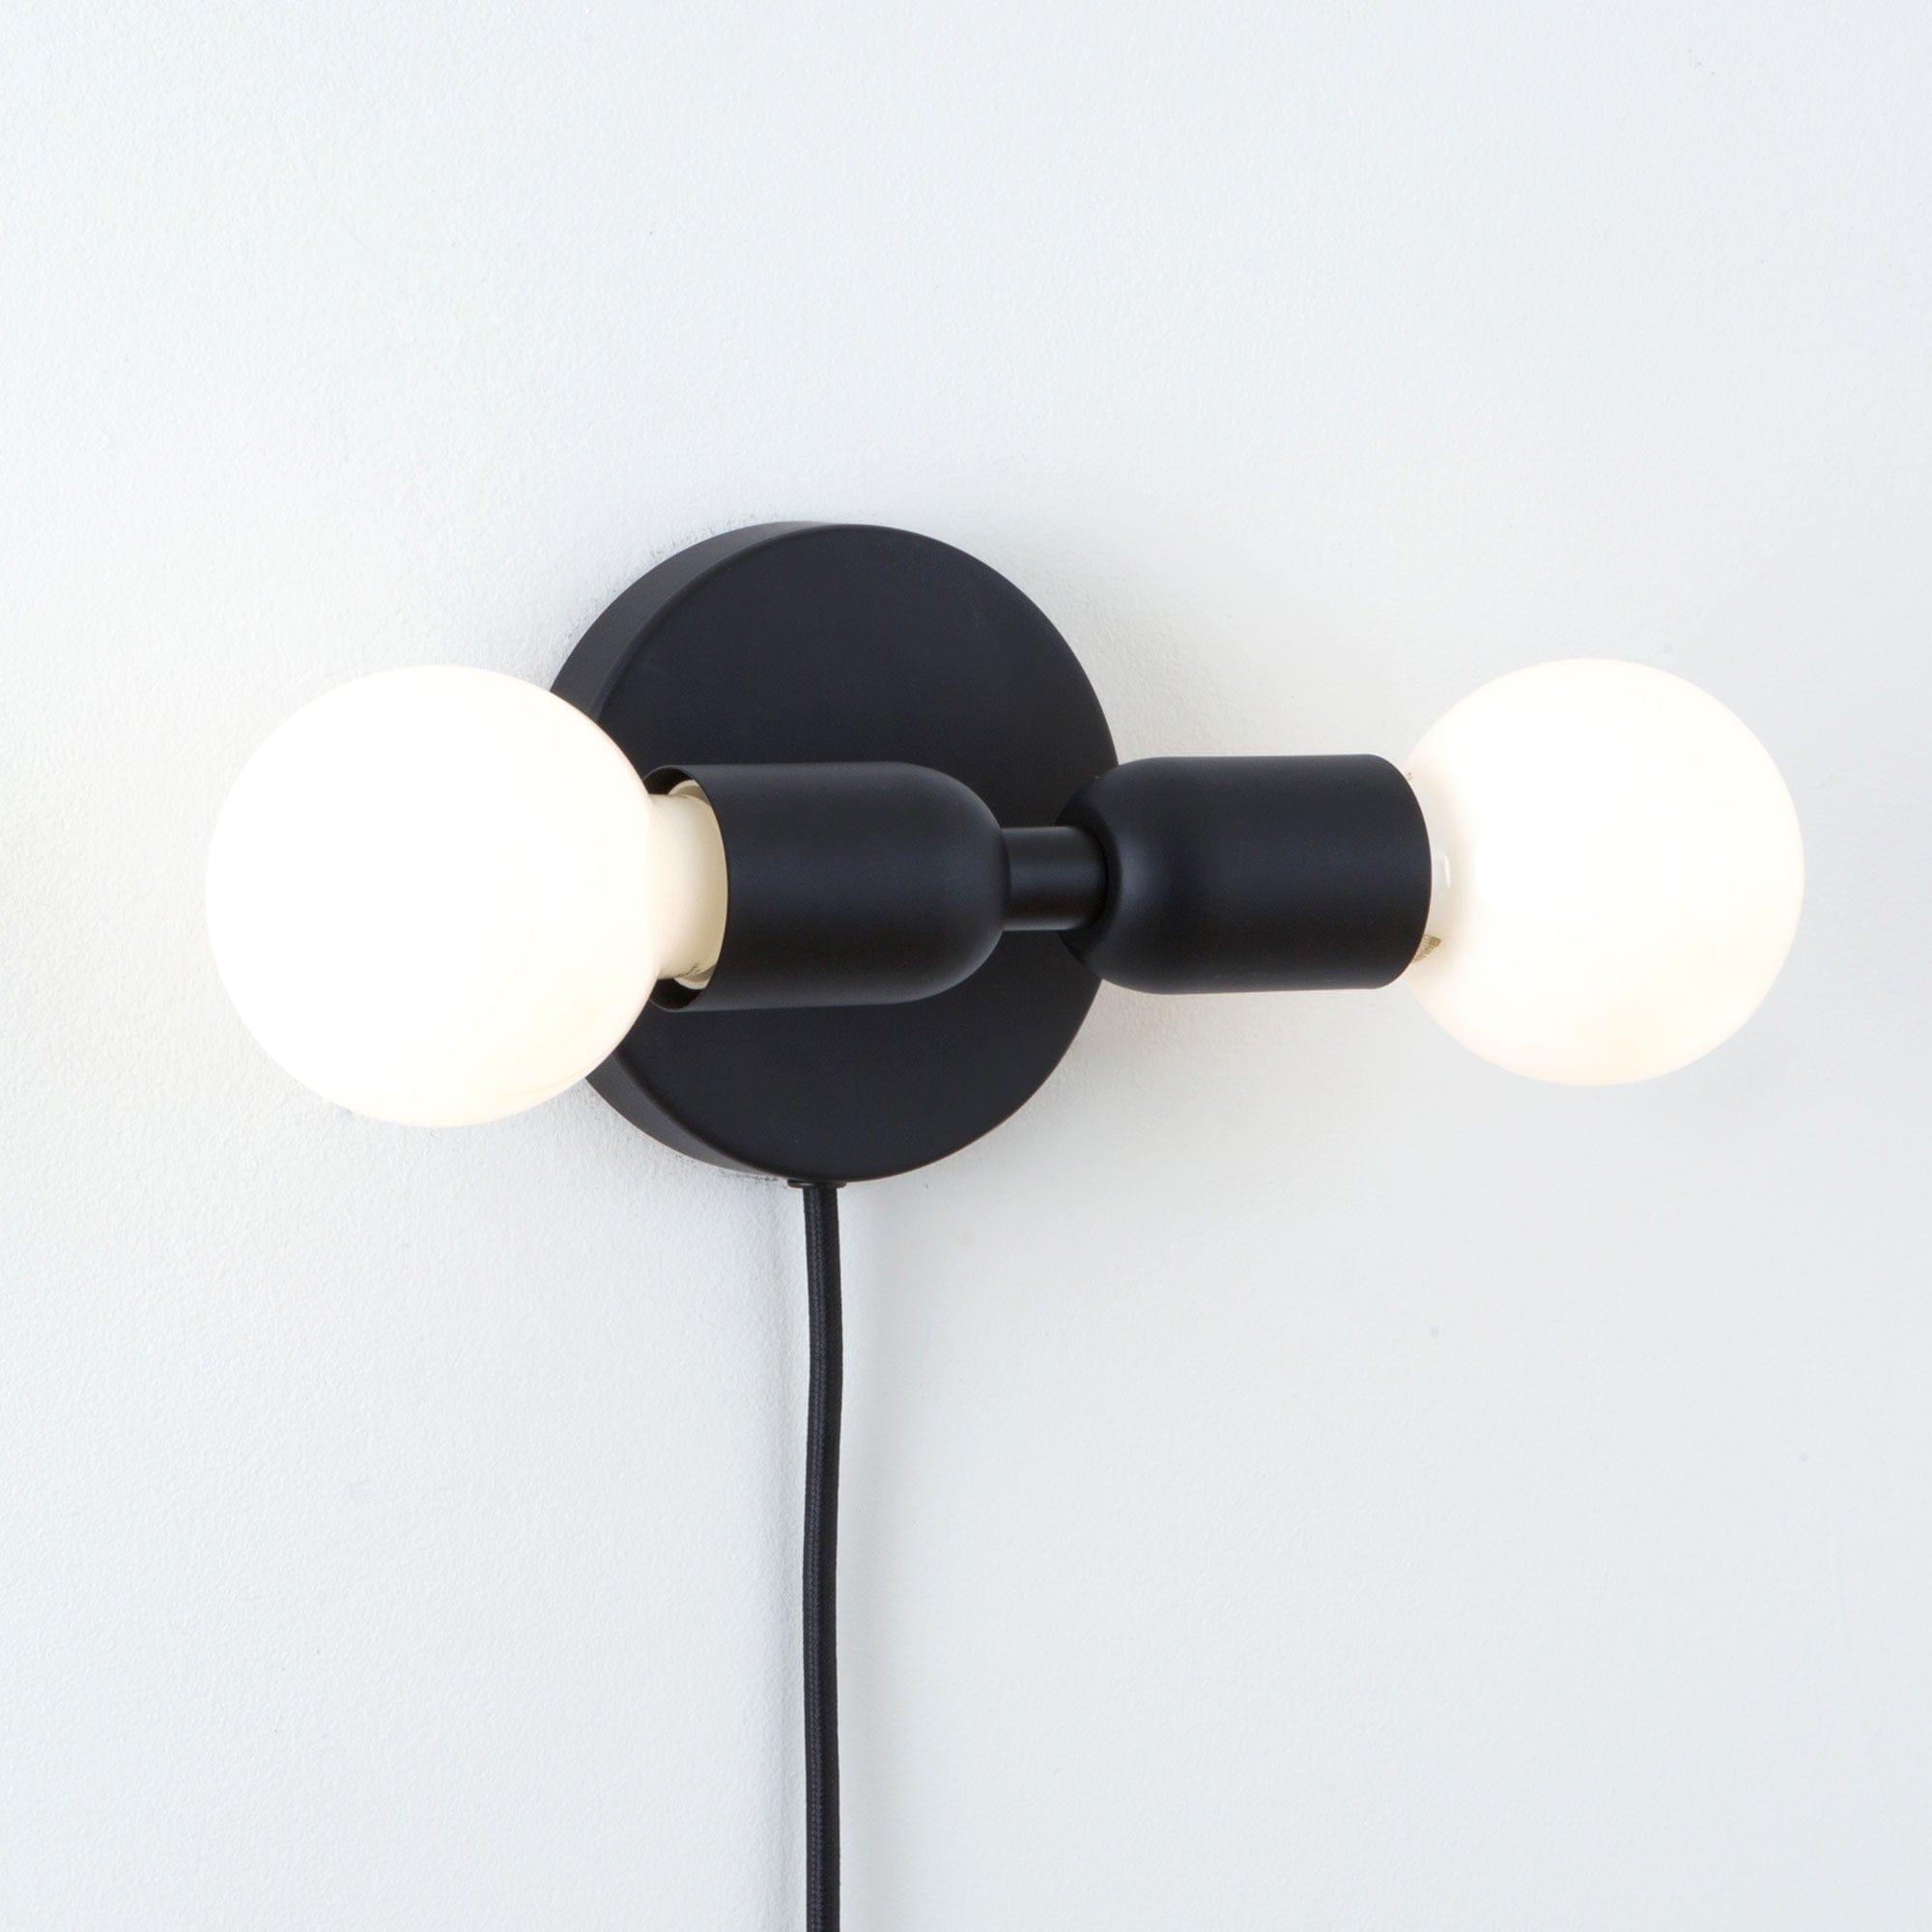 Junction Mini Duo Plug-In Sconce in Matte Black Finish. Pictured in horizontal orientation with G25 milk Glass bulbs